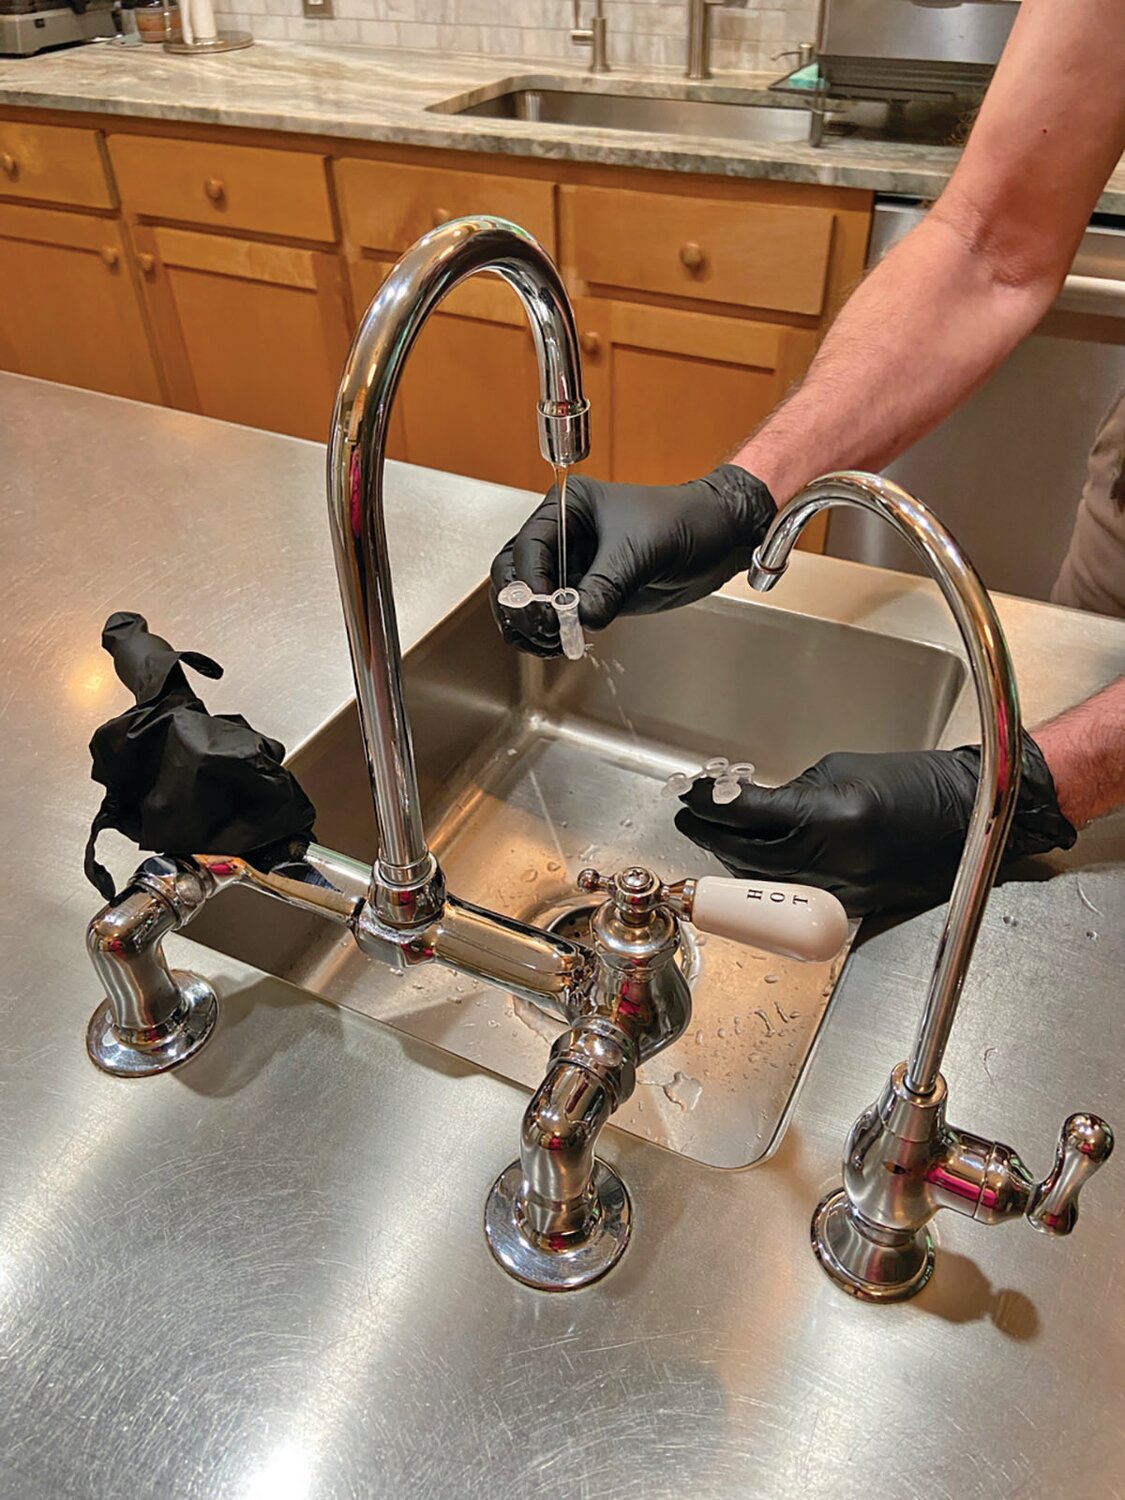 A USGS scientist wearing black gloves is collecting a sample of tap water from the kitchen sink using small plastic vials to test for PFAS.